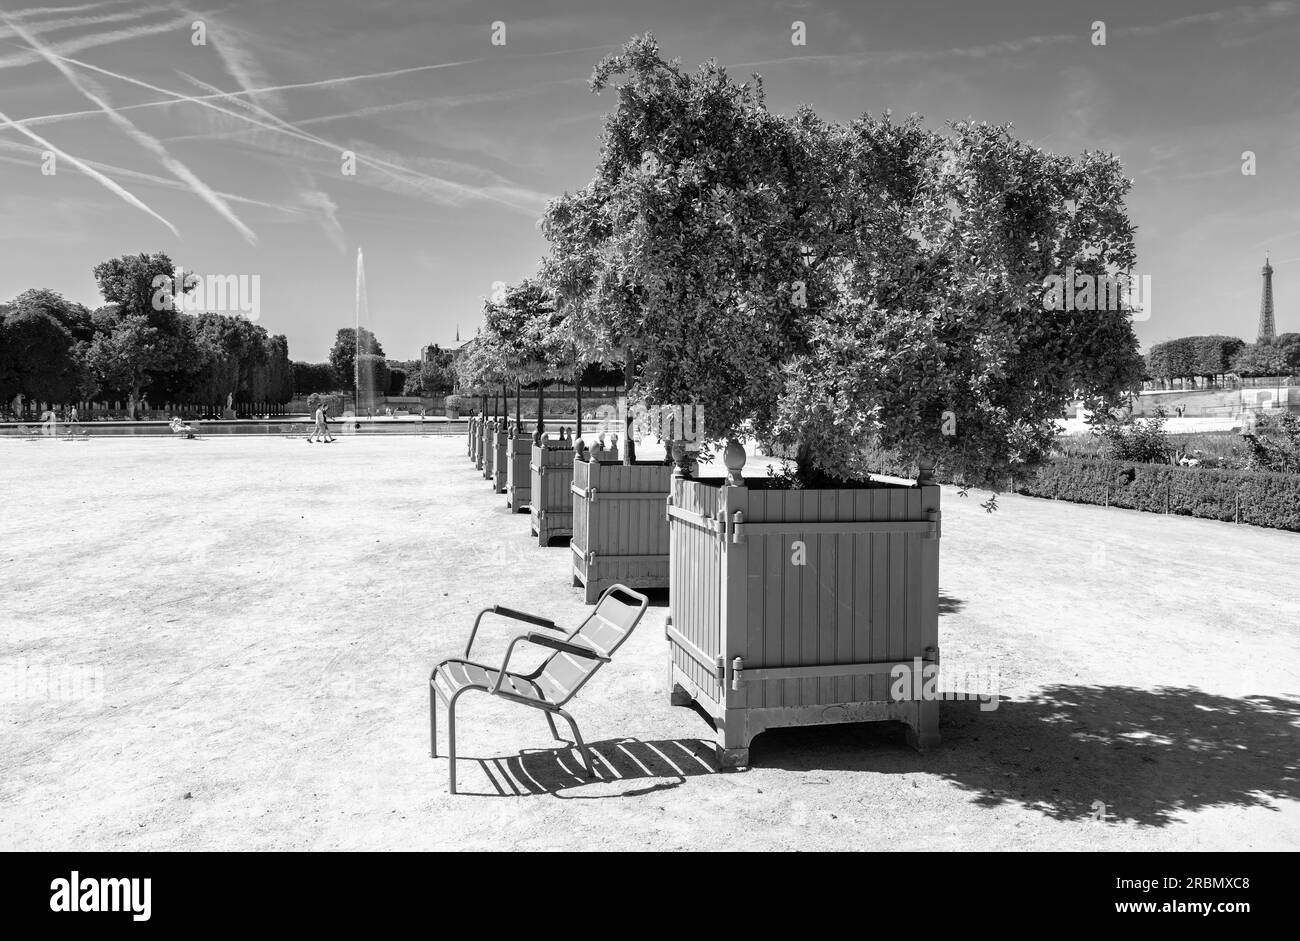 Jardin des Tuileries. Trees and planters in the 17th century, Tuileries Gardens on hot sunny day. 1 Arr. Place de la Concorde, Paris Stock Photo